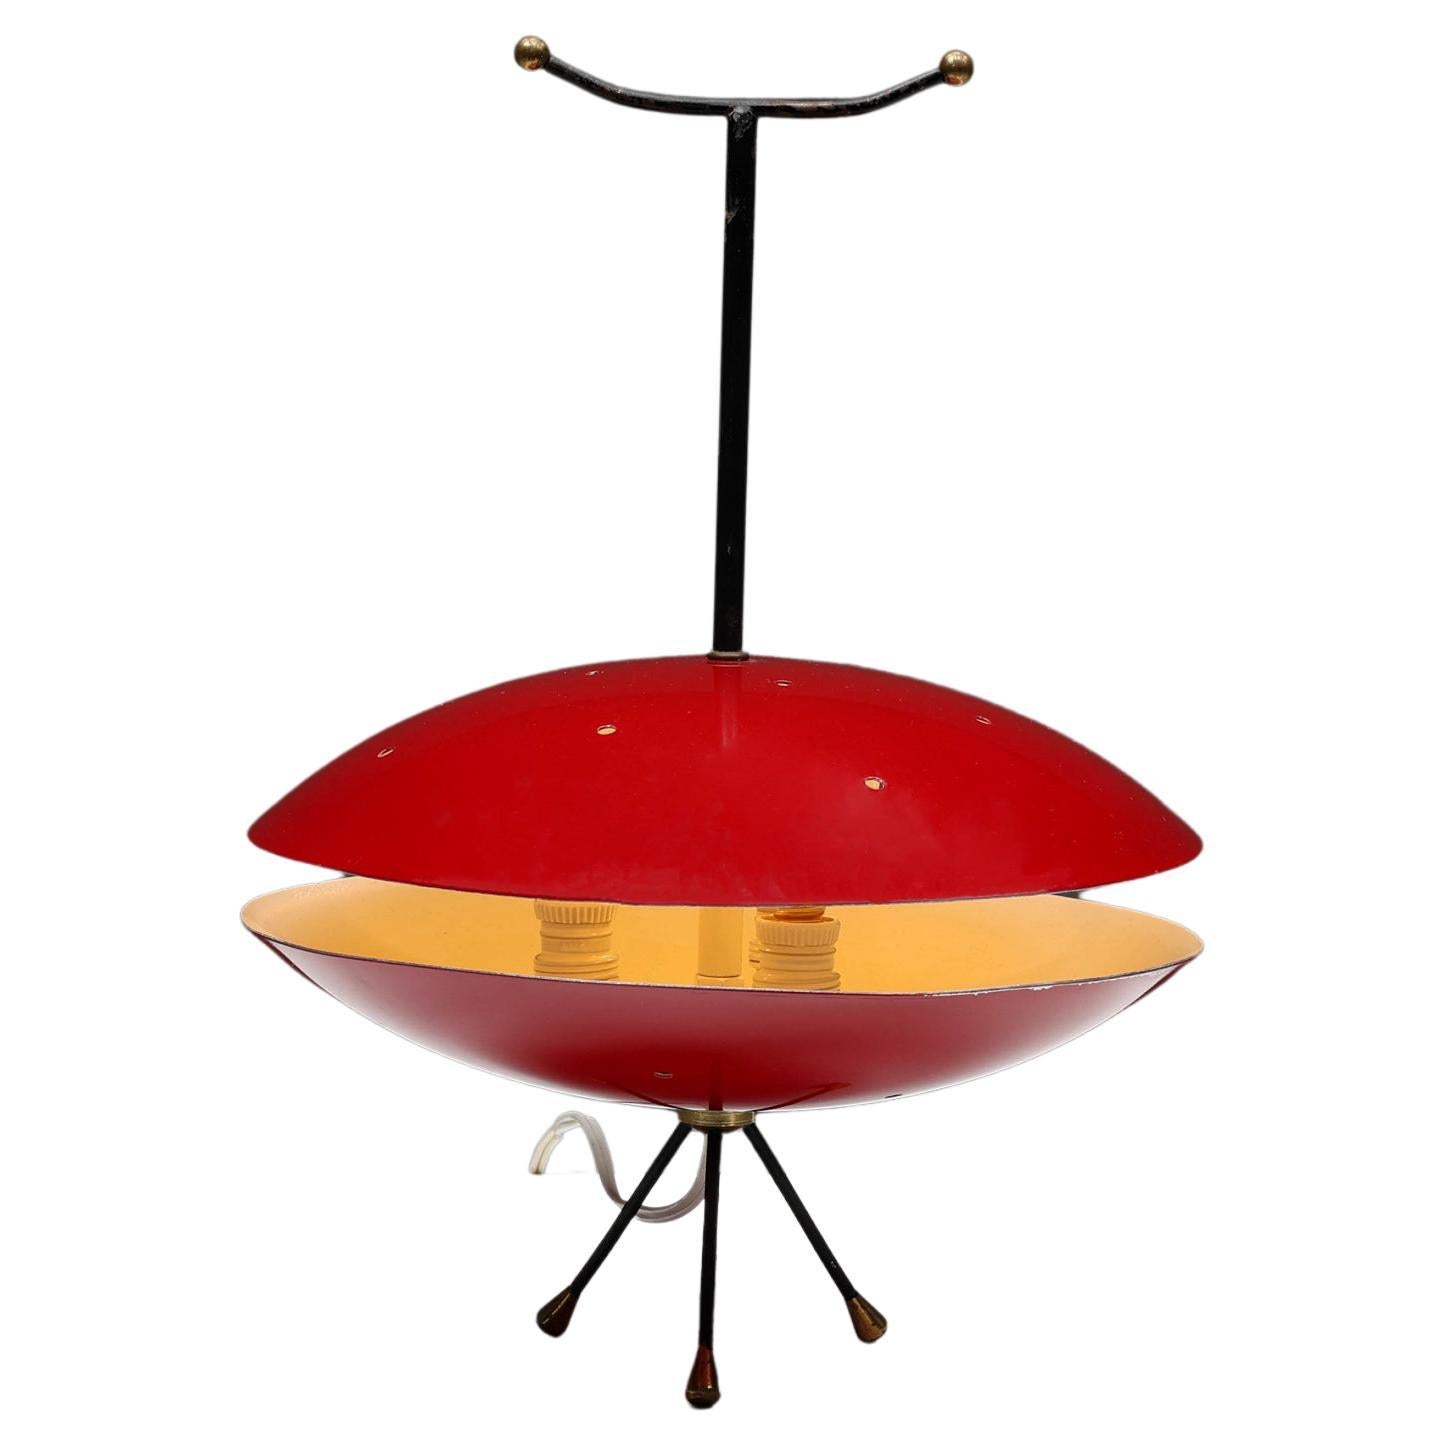 Space Age Red & Black Lamp, Brass Base, Mid-Century Modern, 1970's For Sale